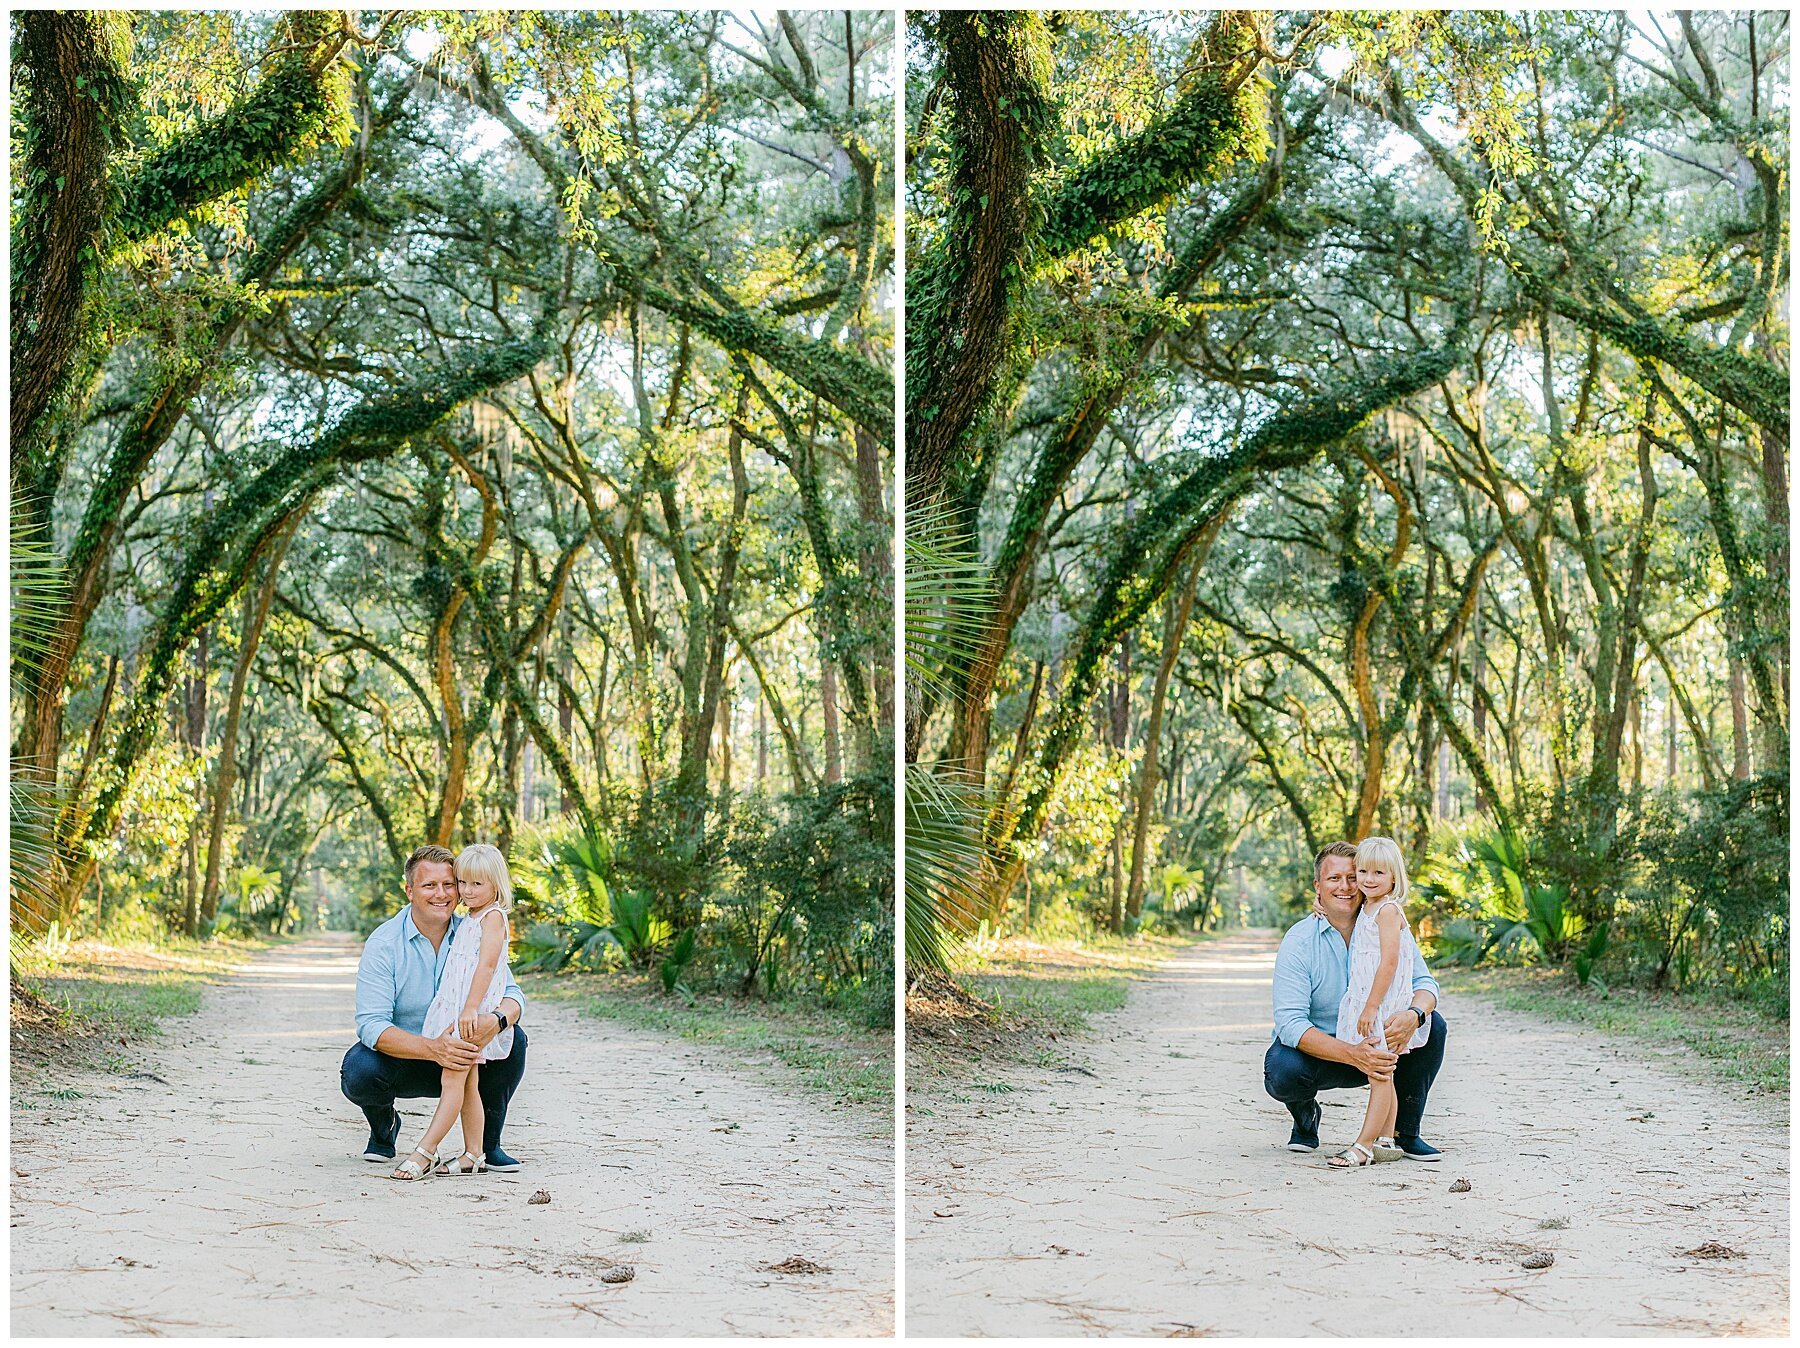 Katherine_Ives_Photography_Mcmillen_Montage_Palmetto_Bluff_27.jpg